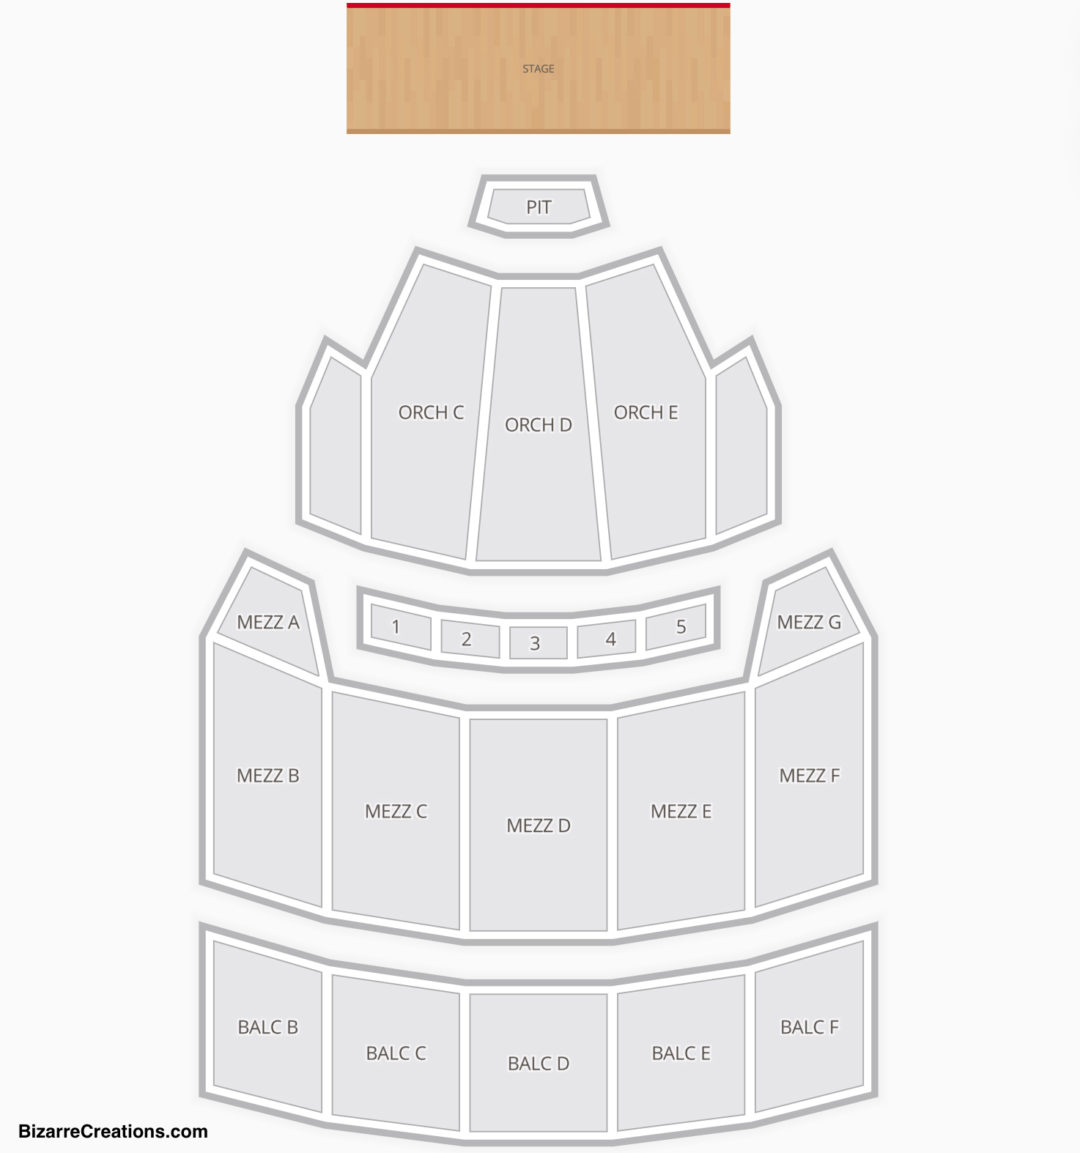 The Bushnell Seating Chart